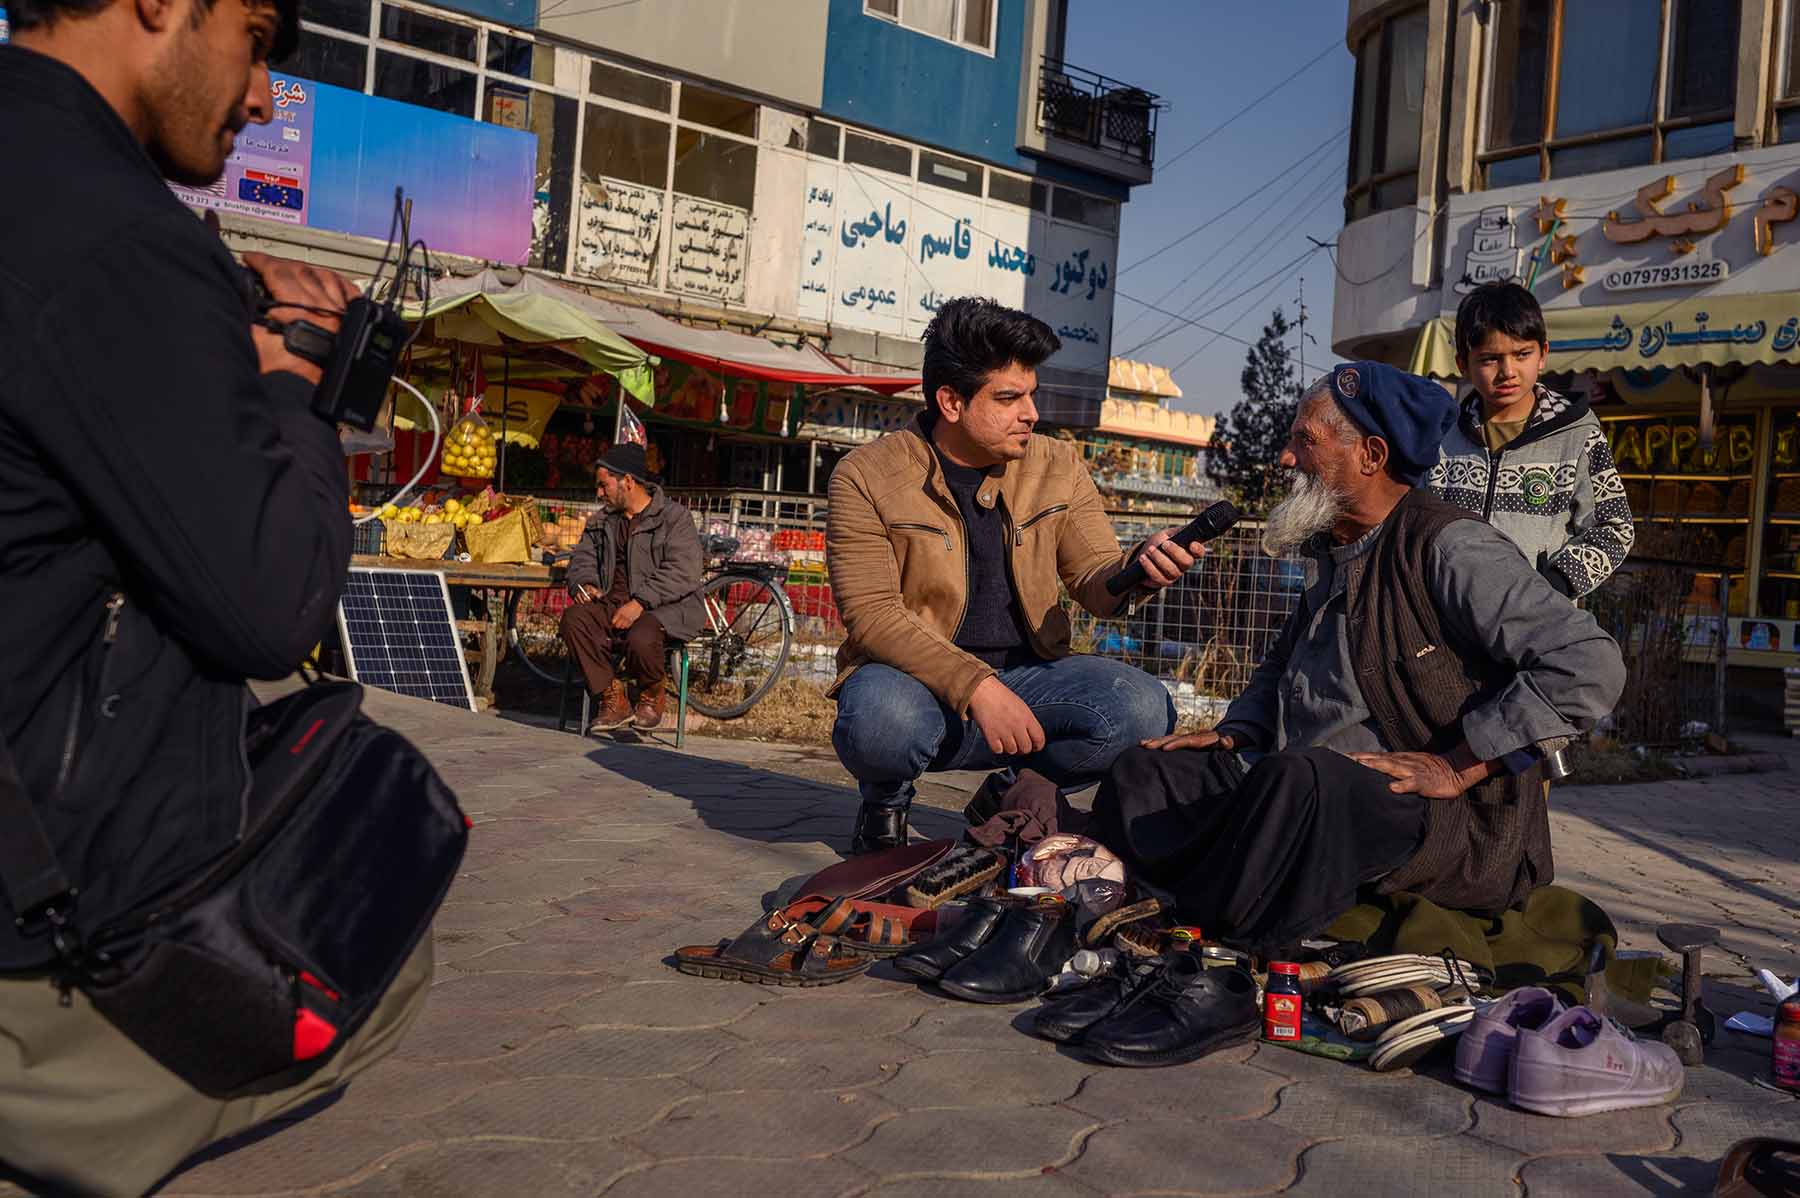 An online producer talks to an older man selling shoes on the street in Kabul.